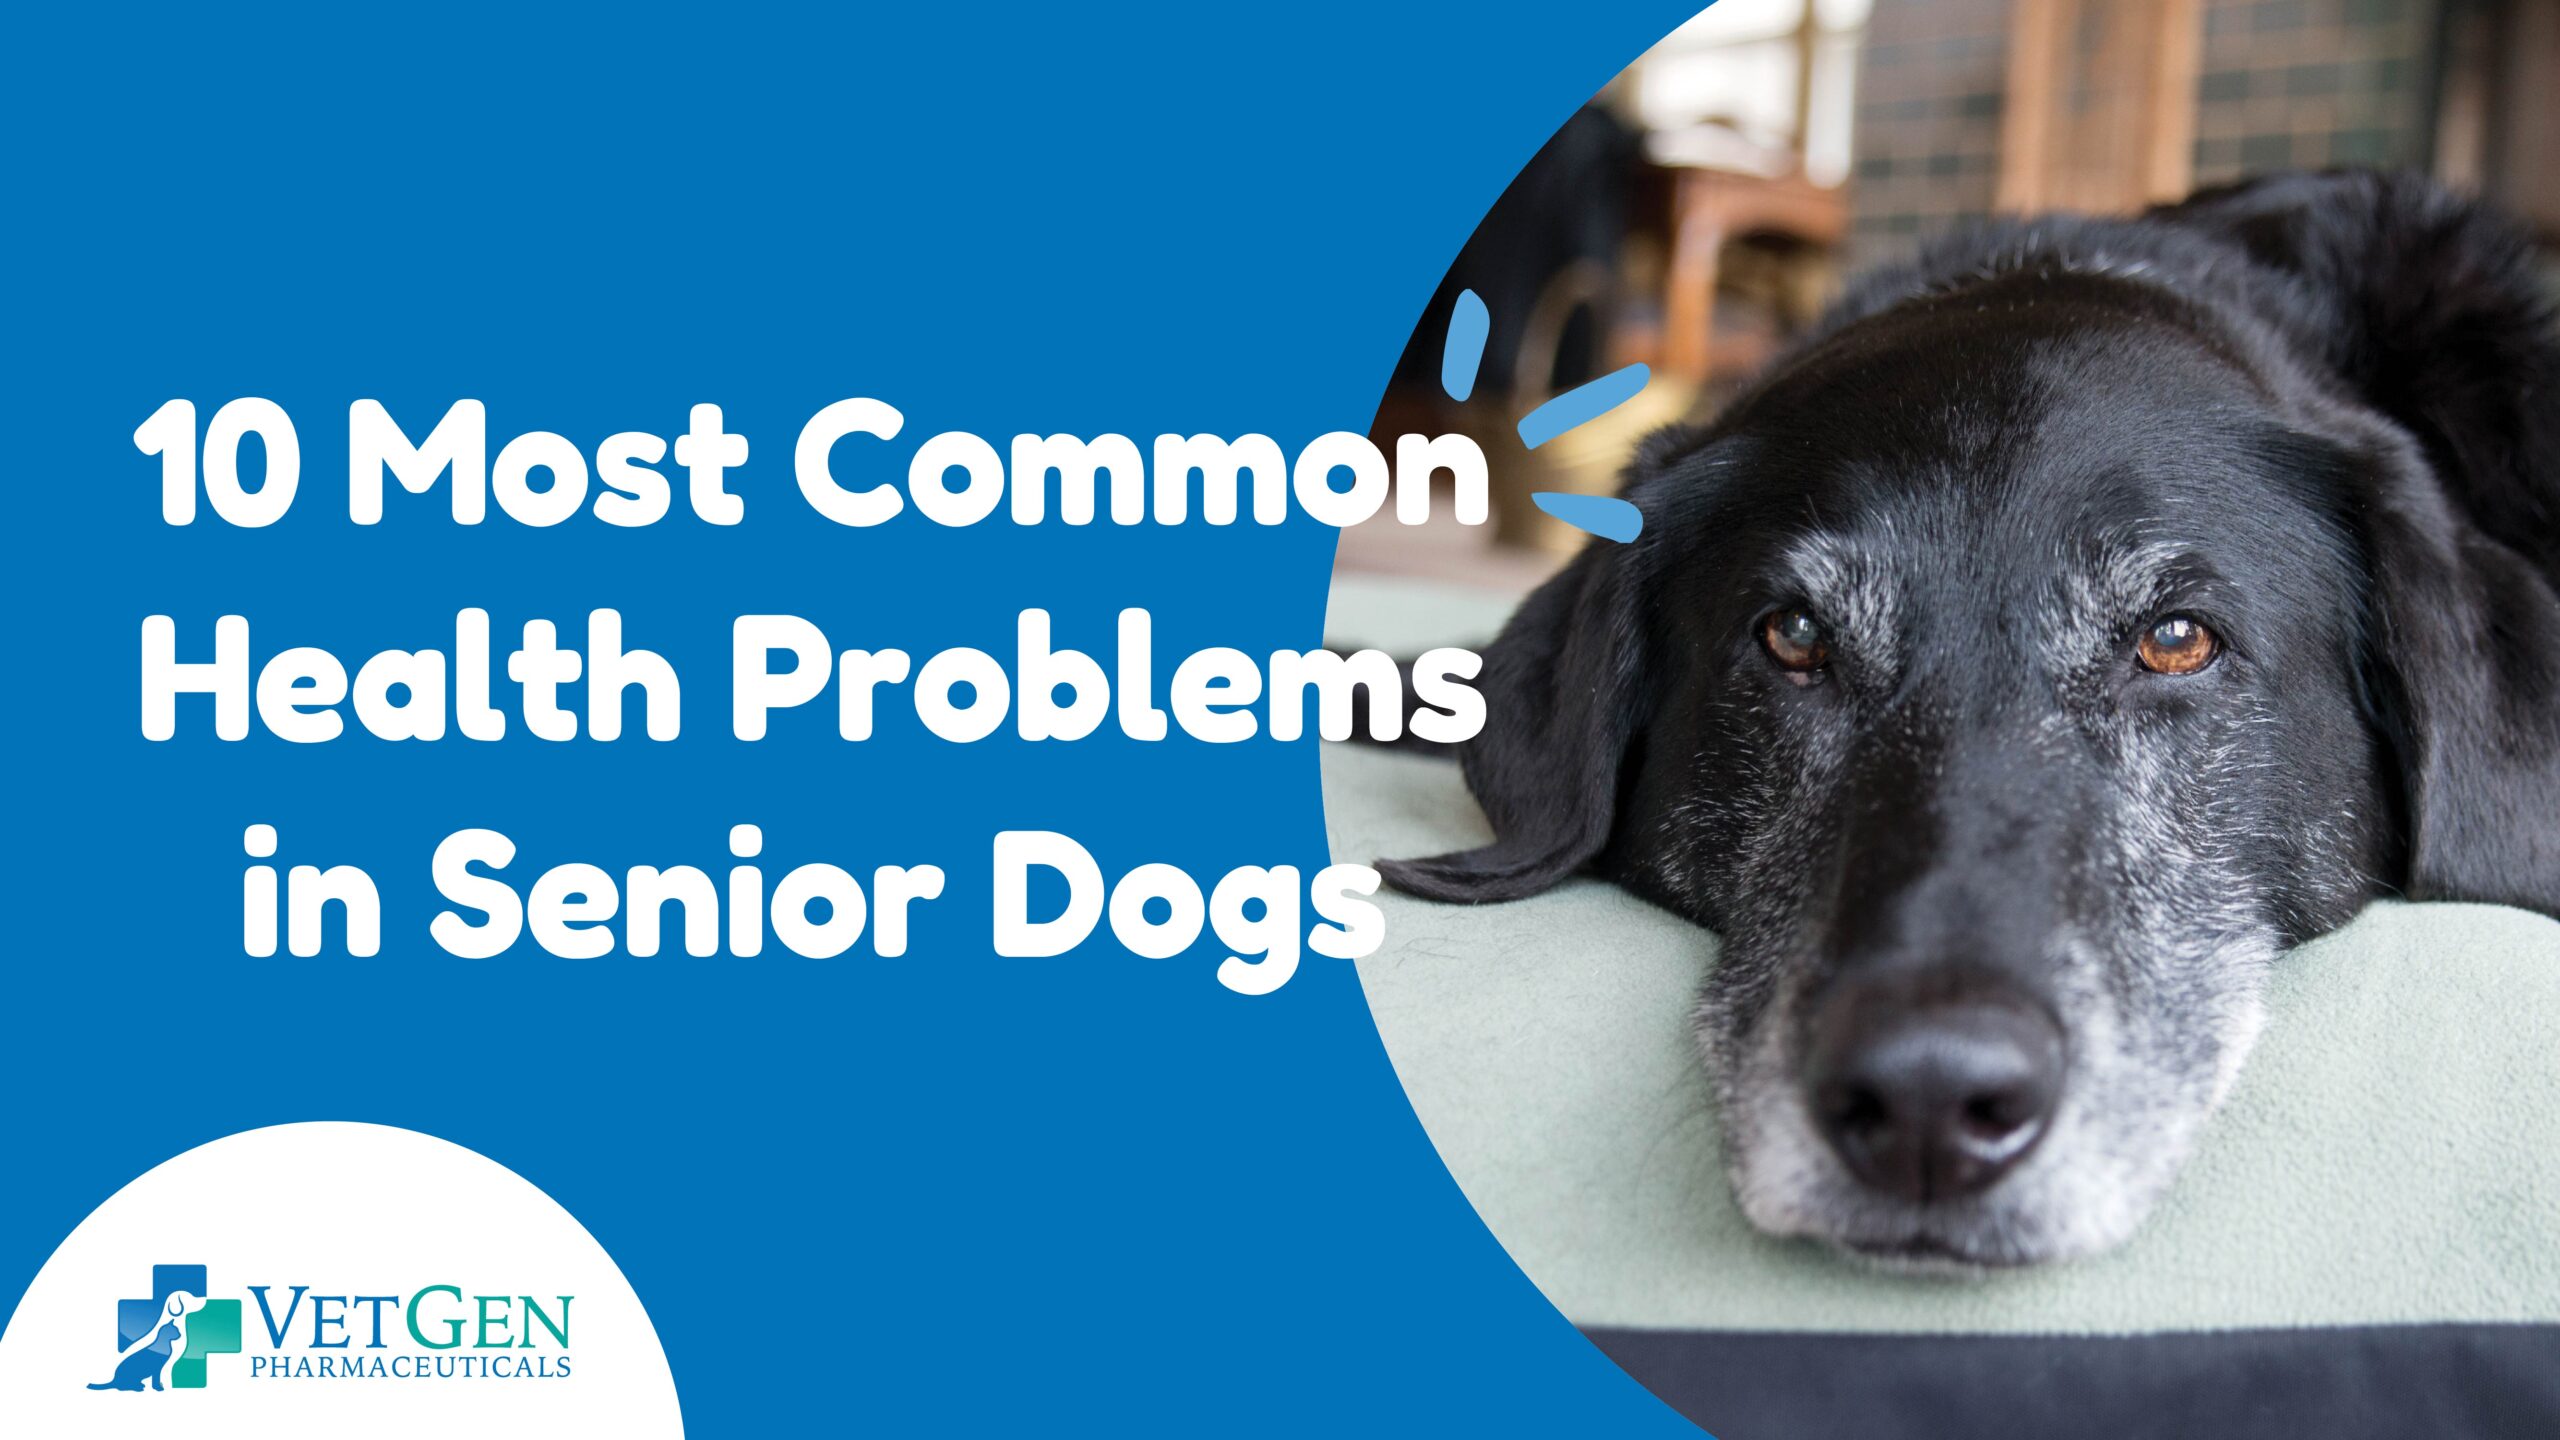 B_10 Most Common Health Problems in Senior Dogs